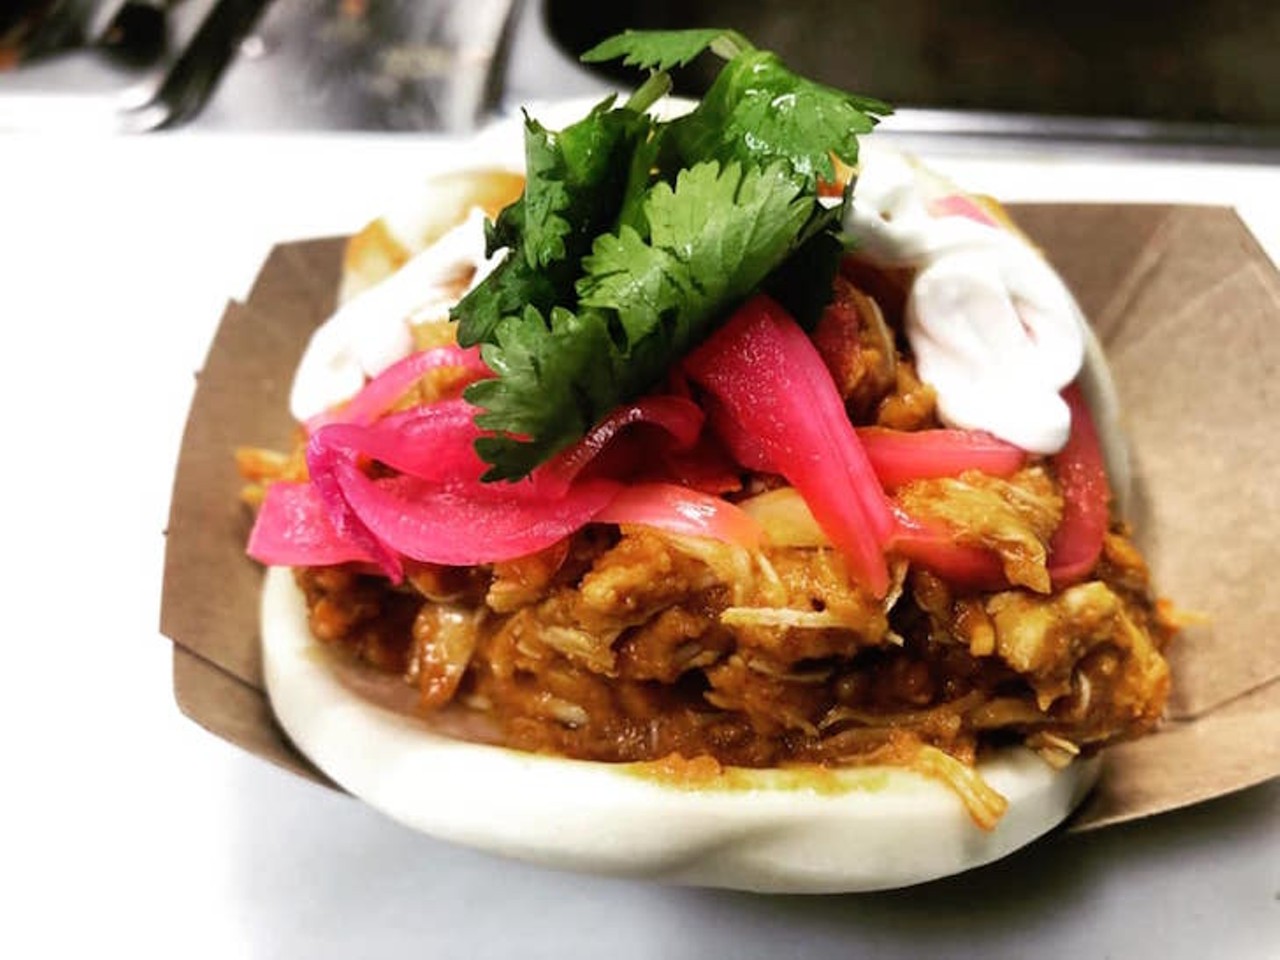 King Bao
710 N. Mills Ave., 407-237-0013 
4.5 stars, 878 reviews. &#147;BEST BAO FOR THE PRICE! Also one of the must visit if you're in the area. They portions are great and they put so much meat/protein inside.&#148; --Zerlaine P.
Photo via King Bao